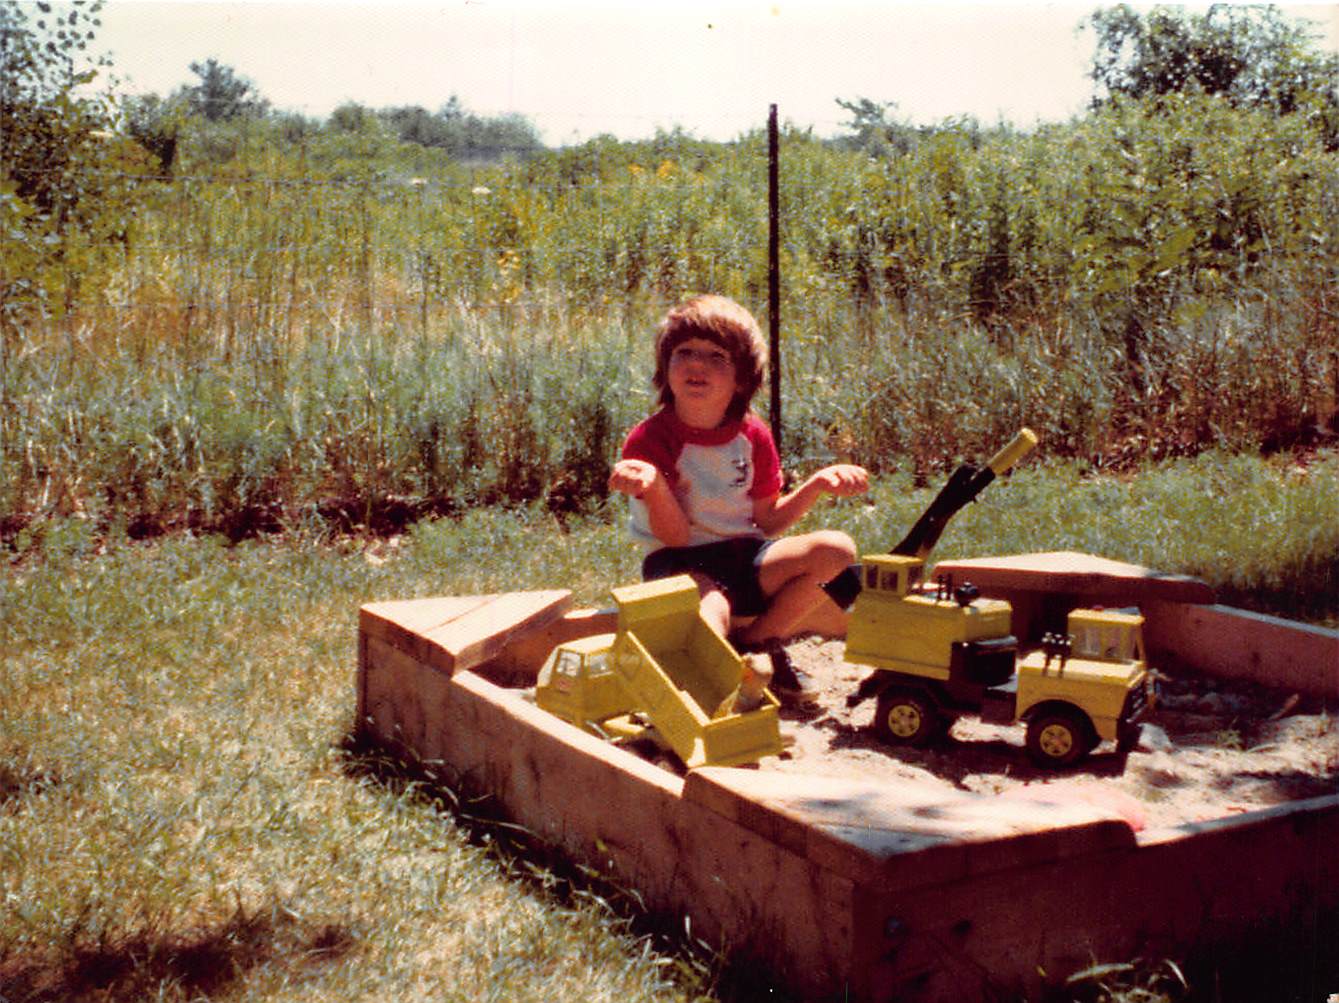 Early Adventures in The Sandbox